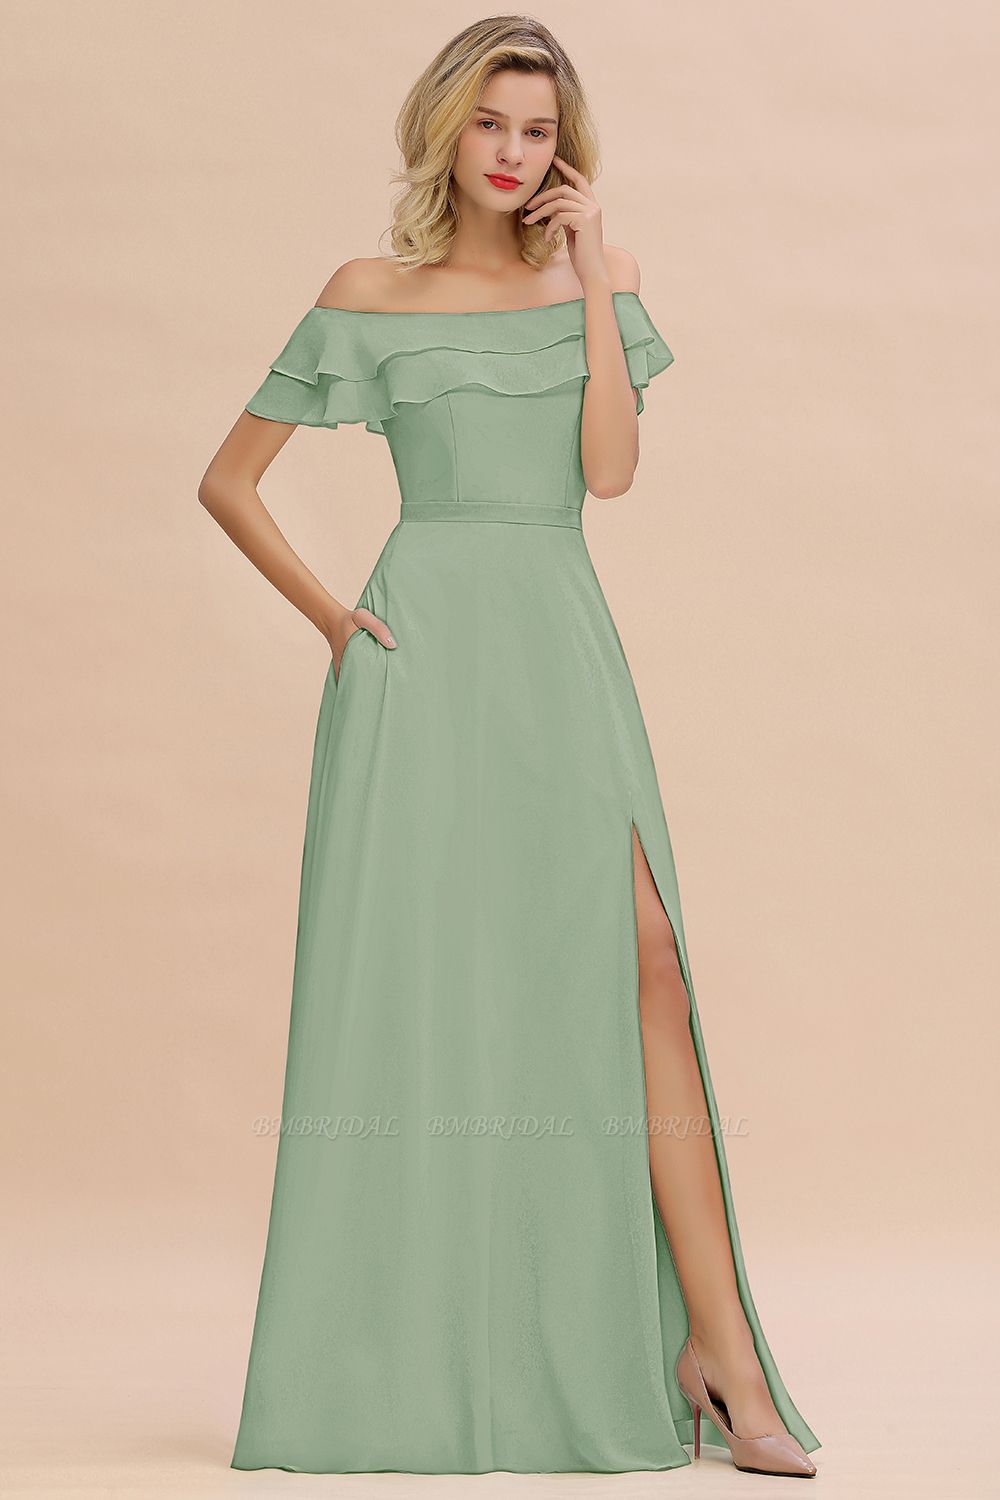 BMbridal Exquisite Off-the-shoulder Slit Mint Green Bridesmaid Dress With Pockets